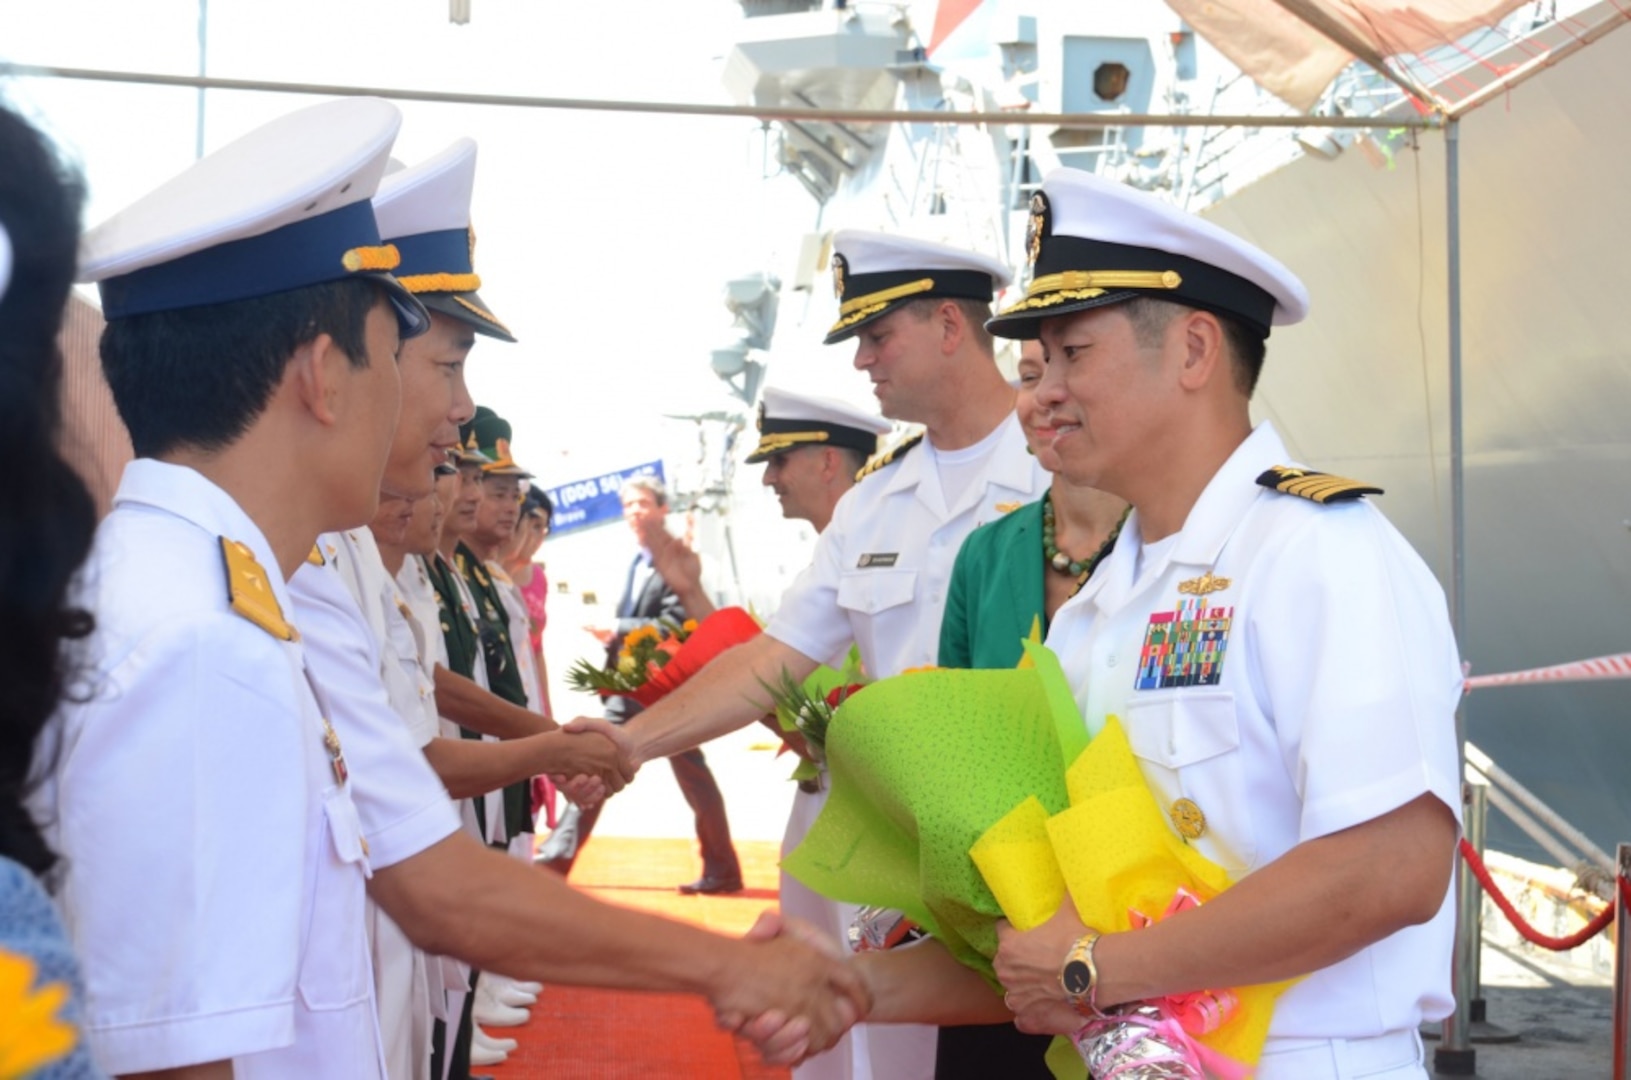 Capt. H. B. Le, commodore, Destroyer Squadron 7, shakes hands with members of the Vietnam People's navy during a welcome ceremony in Da Nang in support of Naval Engagement Activity (NEA) Vietnam 2016. In its seventh year, NEA Vietnam is designed to foster mutual understanding, build confidence in the maritime domain and strengthen relationships between the U.S. Navy, Vietnam People's navy and the local community. 